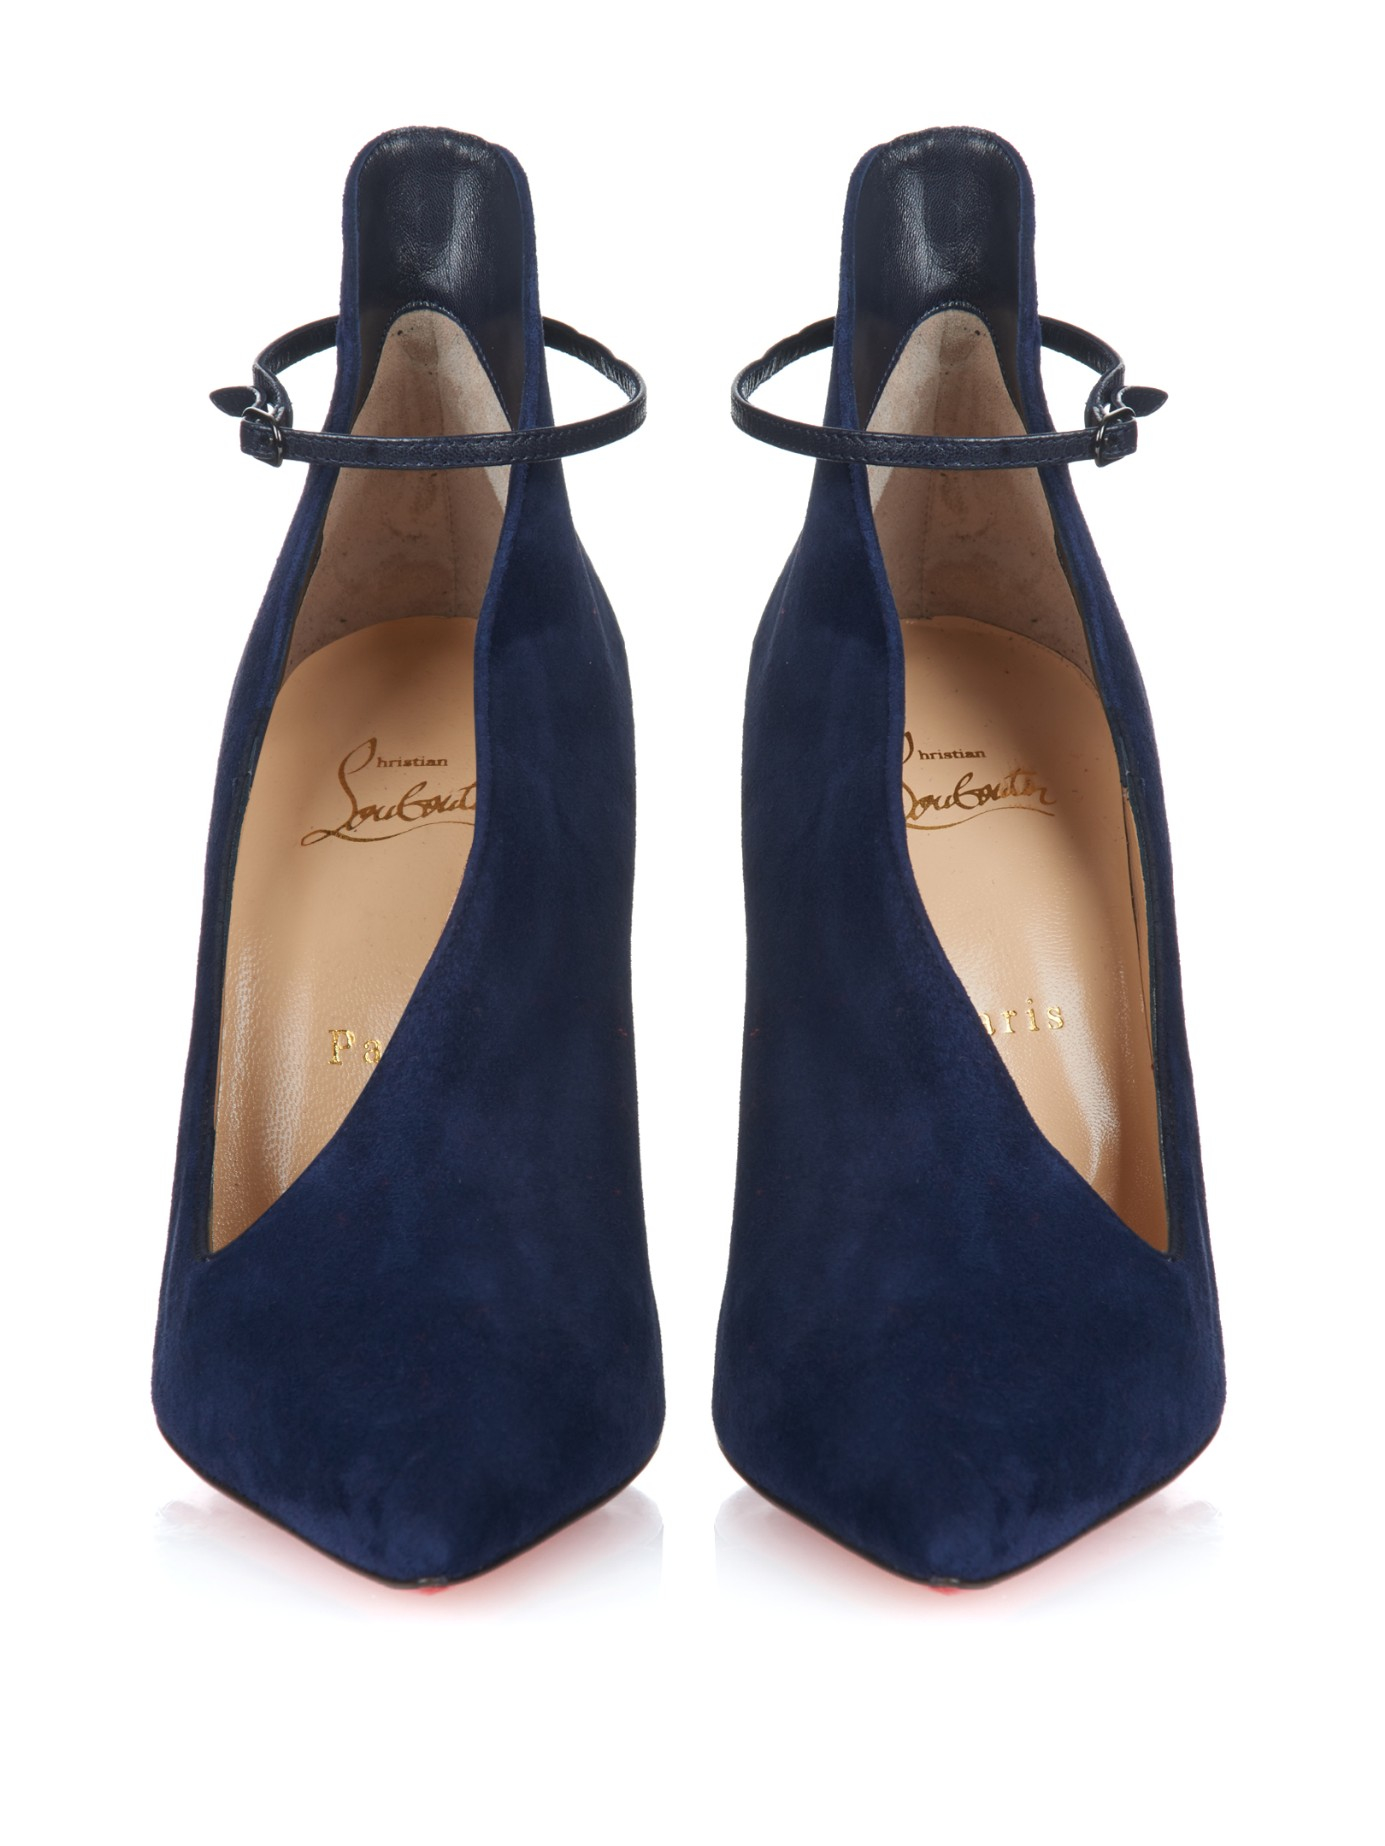 CHRISTIAN LOUBOUTIN: Astrida pumps in suede - Blue  Christian Louboutin  high heel shoes 3230712 online at